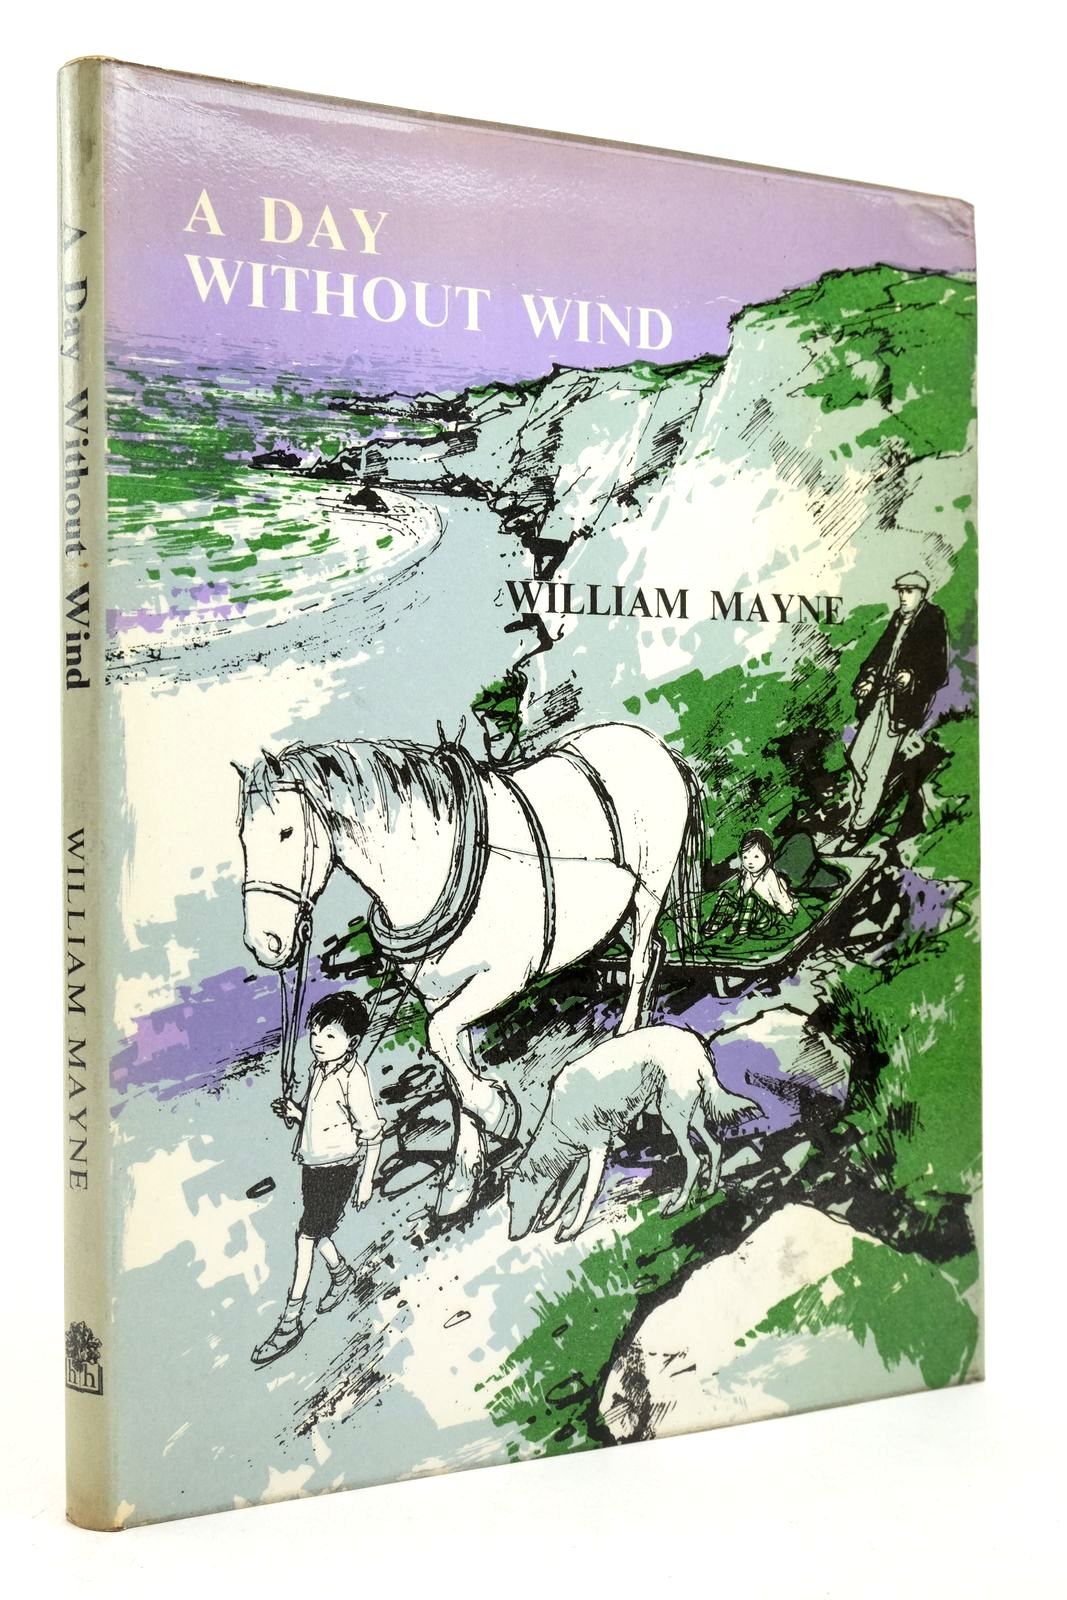 Photo of A DAY WITHOUT WIND written by Mayne, William illustrated by Gill, Margery published by Hamish Hamilton (STOCK CODE: 2140274)  for sale by Stella & Rose's Books